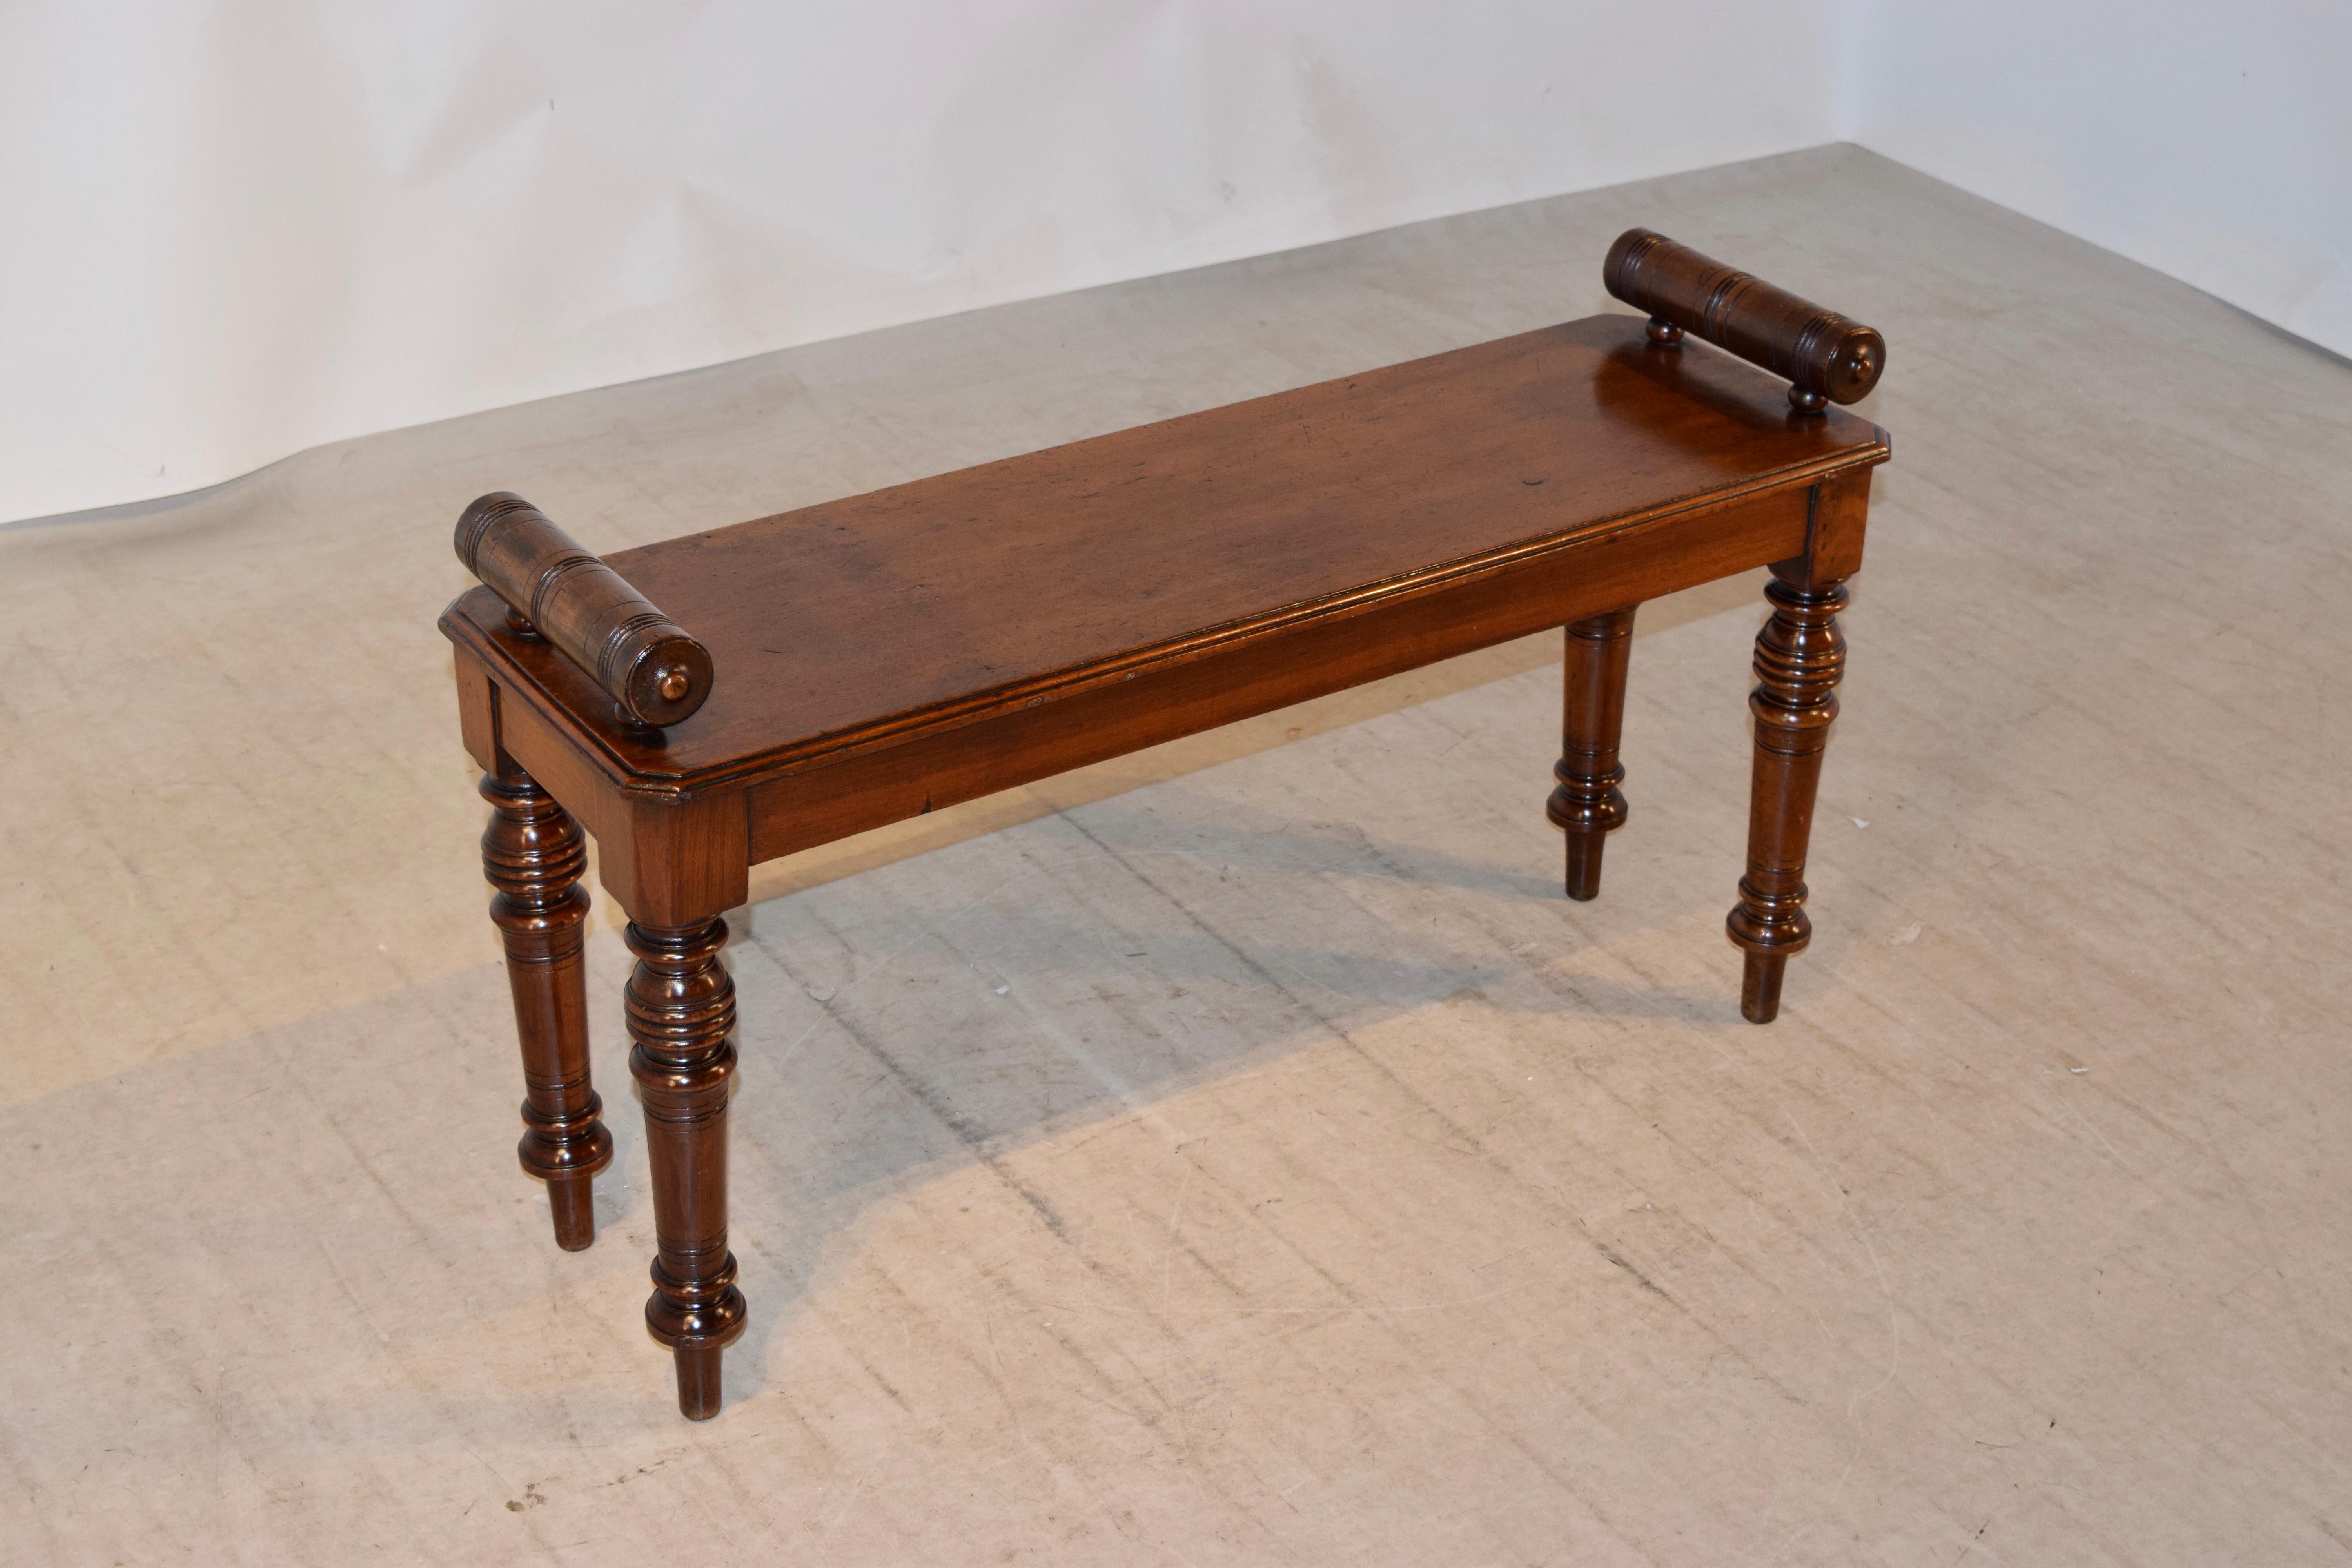 19th century English window seat made from mahogany with hand-turned rolled arms atop a single plank seat with beveled edges following down to a simple apron and supported on hand-turned legs.